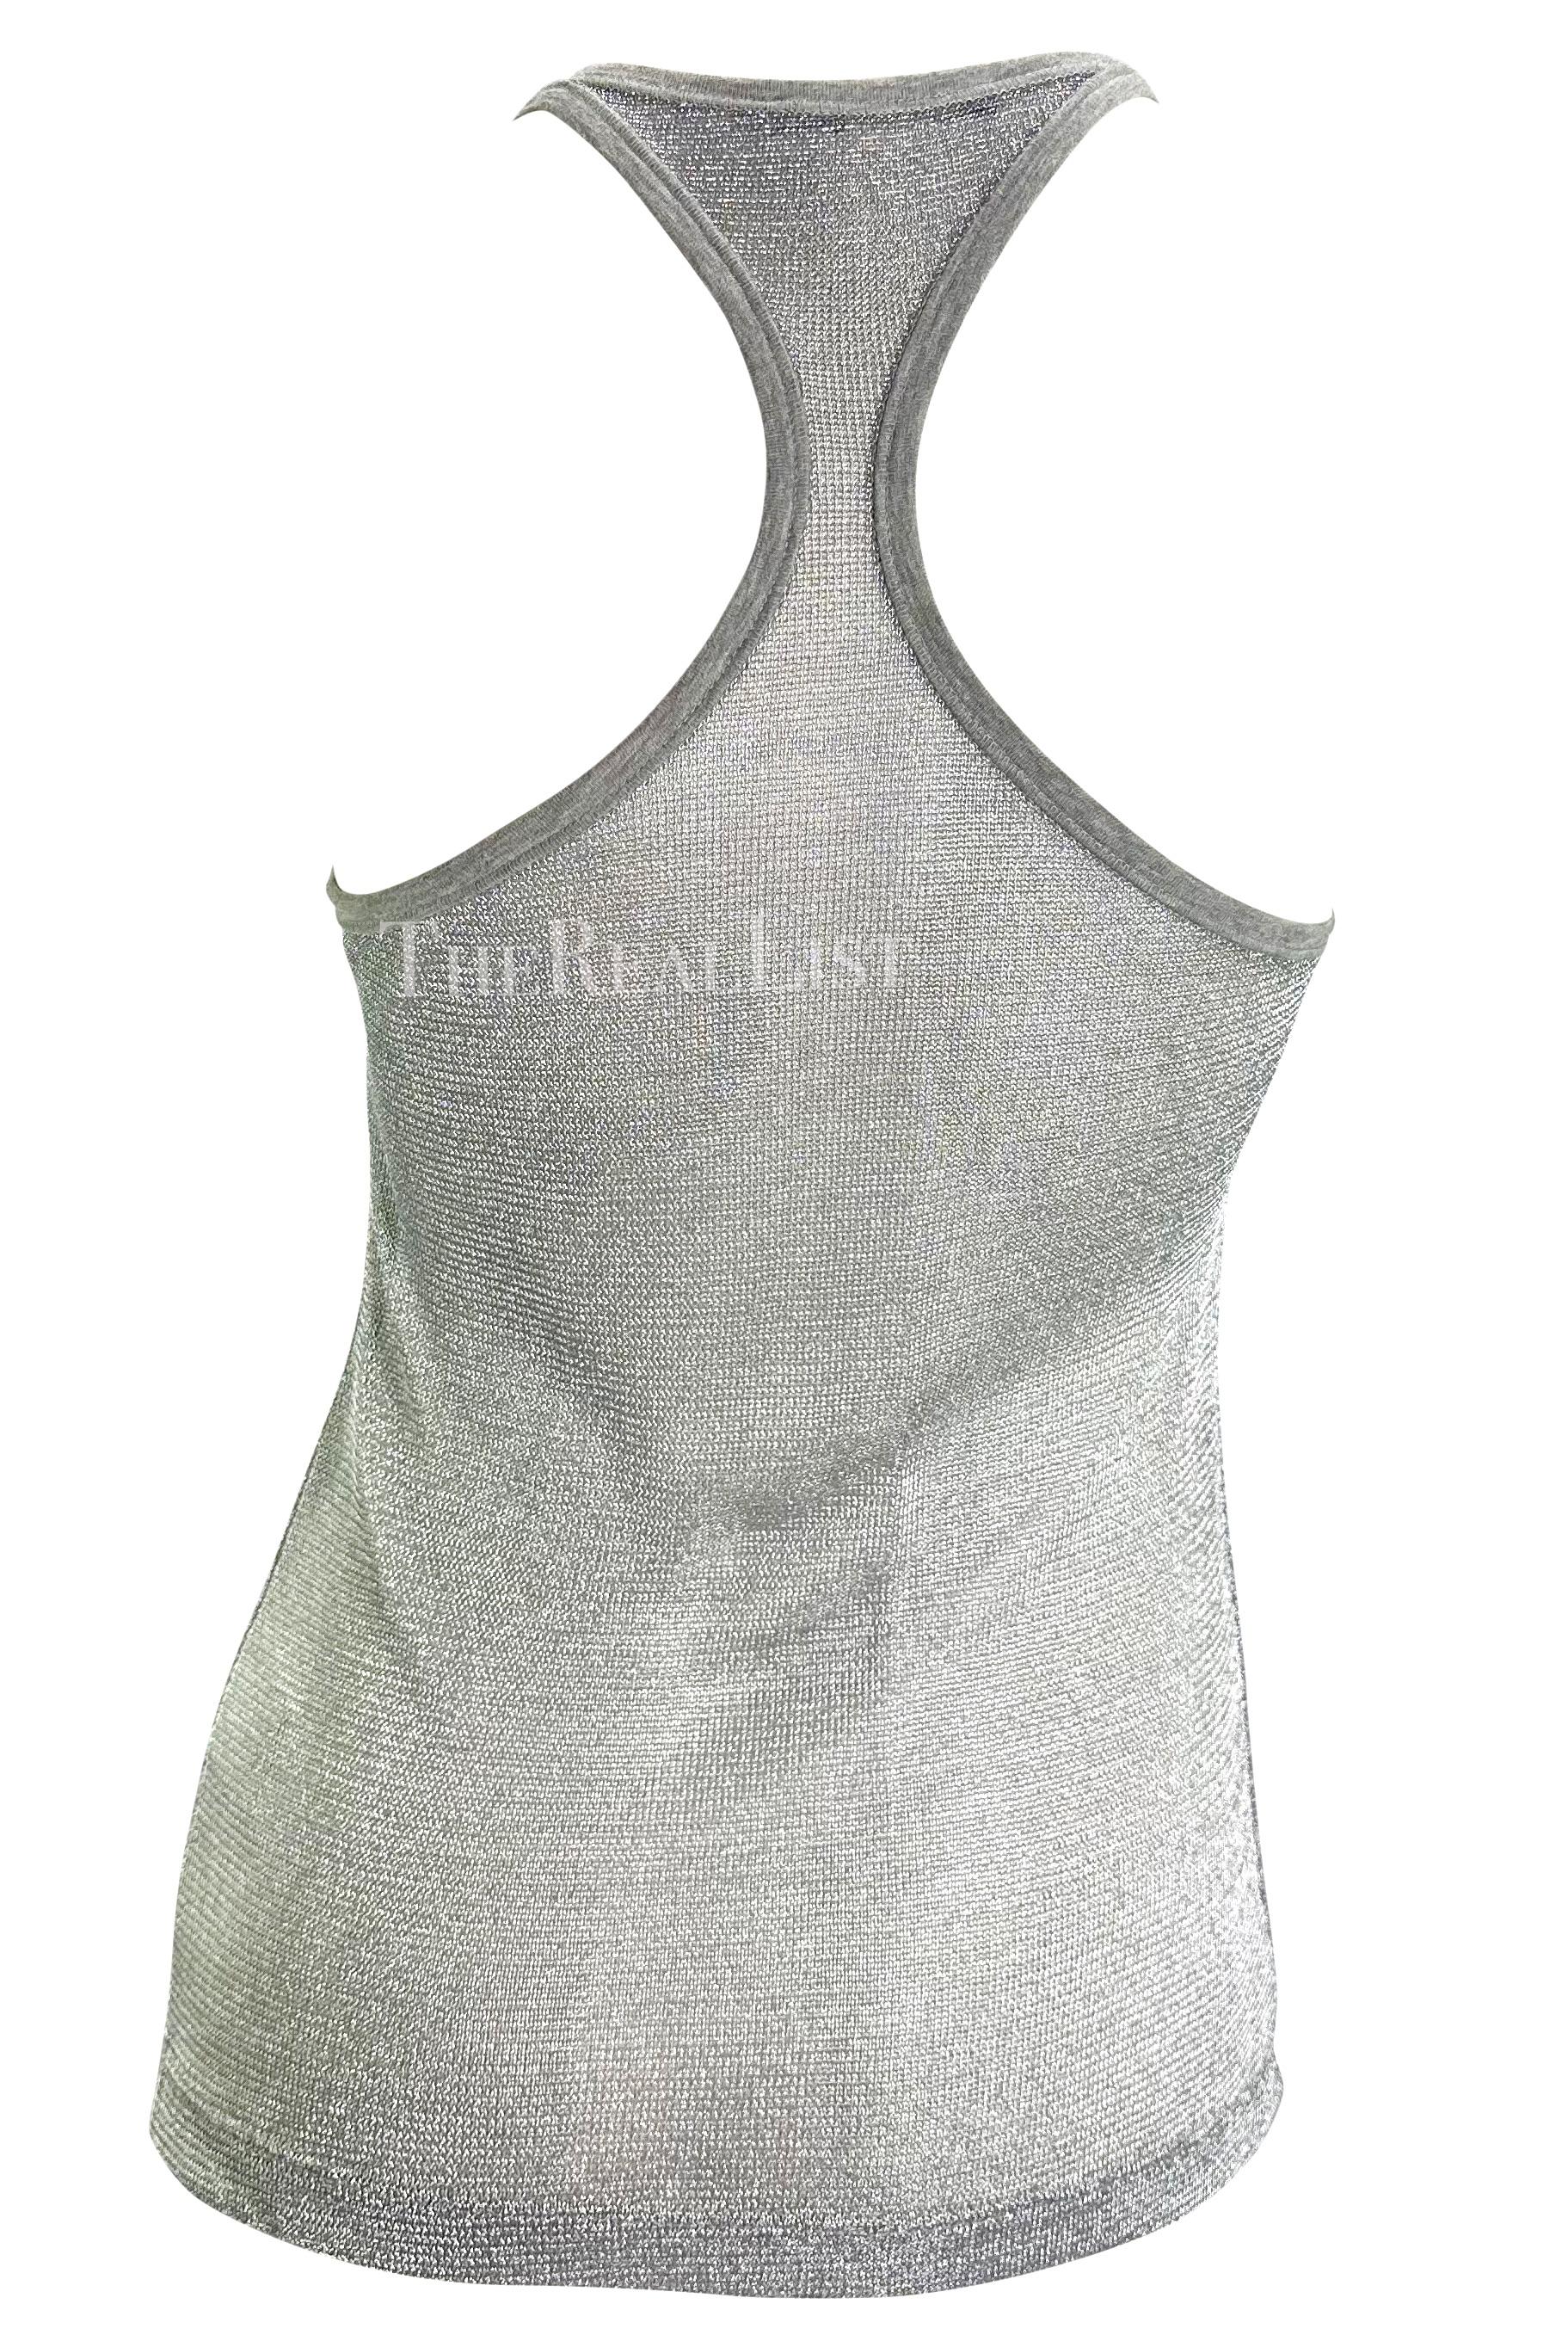 S/S 2003 Dolce & Gabbana Runway Ad Silver Woven Metal Mesh Racerback Tank Top  For Sale 4